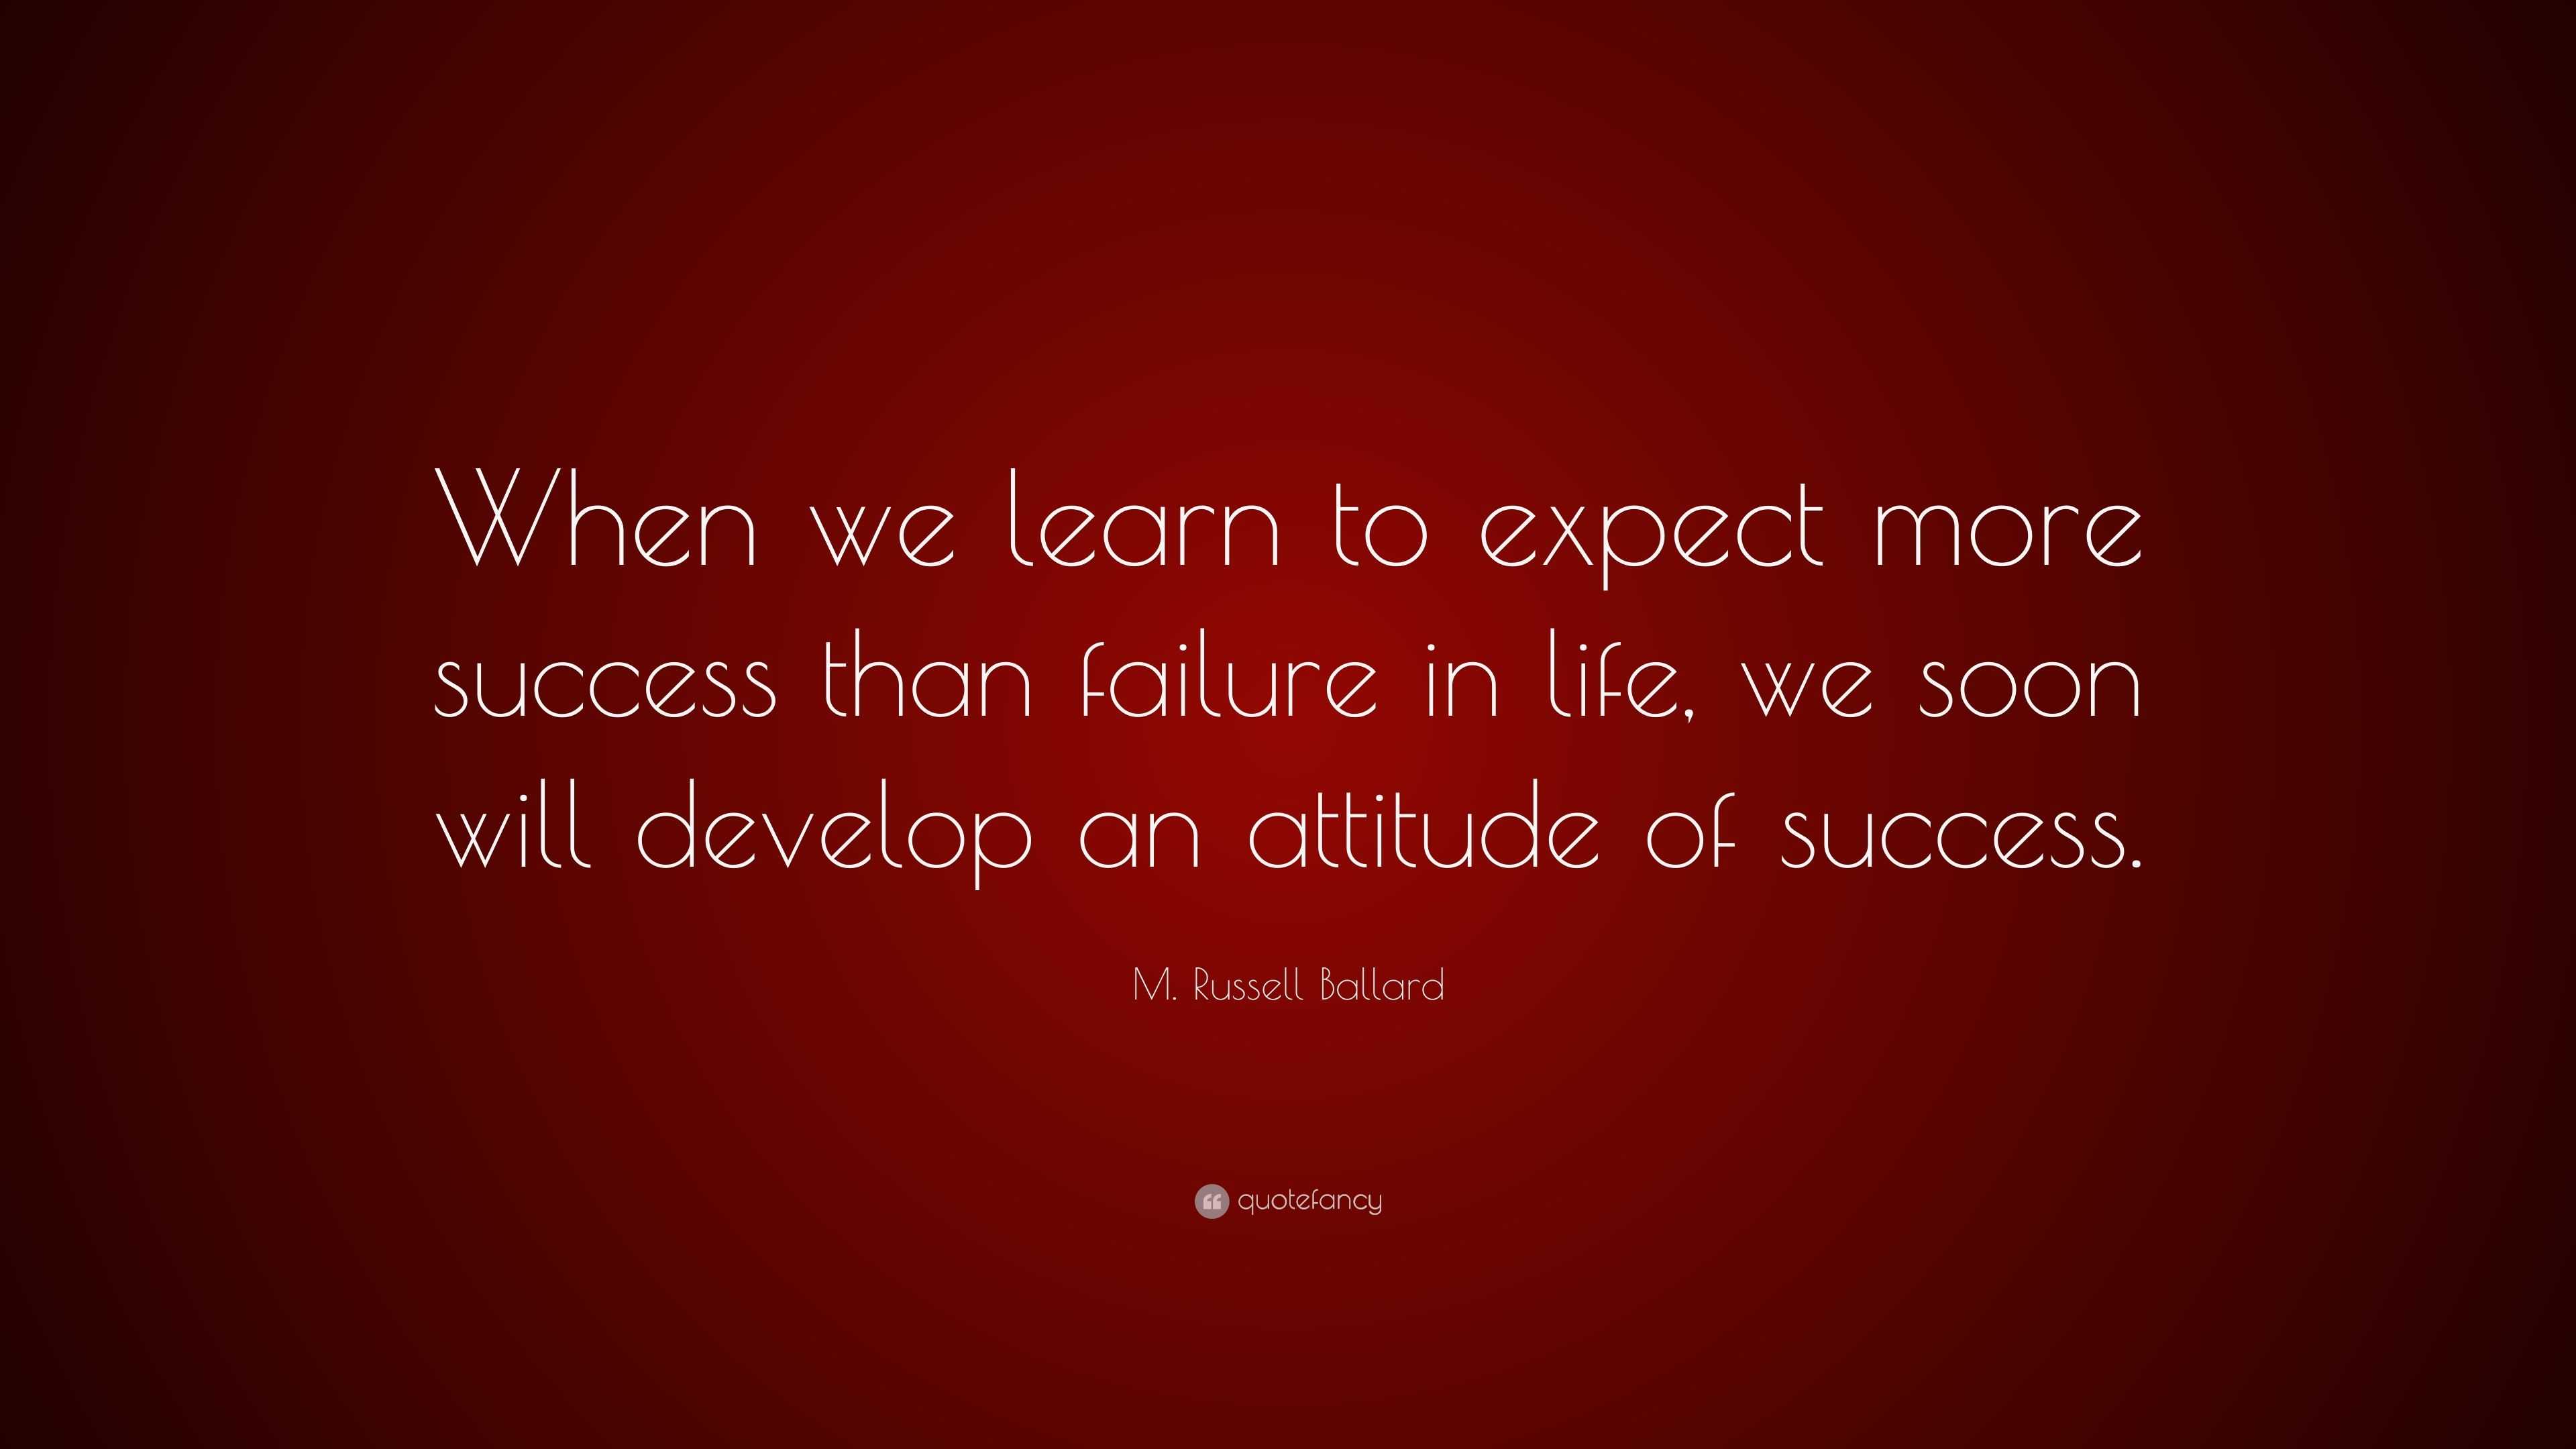 Quote by M. Russell Ballard: Learning the lessons of the